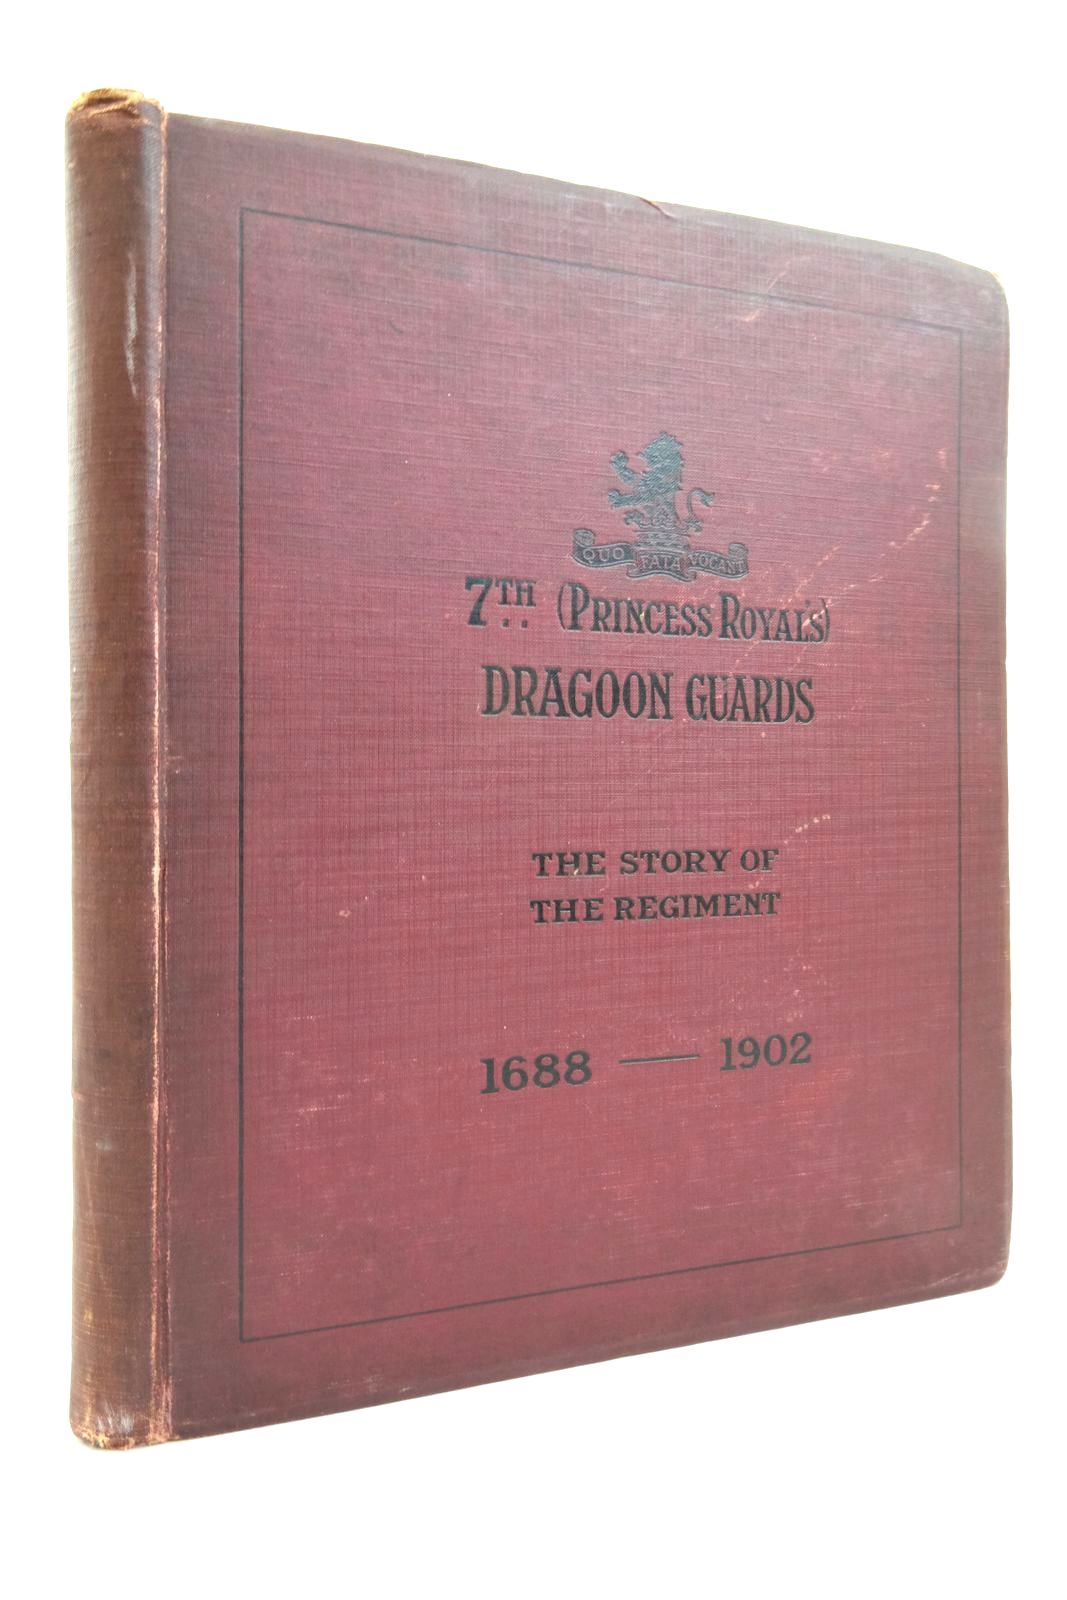 Photo of SEVENTH (PRINCESS ROYAL'S) DRAGOON GUARDS: THE STORY OF THE REGIMENT (1688-1882) AND WITH THE REGIMENT IN SOUTH AFRICA (1900-1902)- Stock Number: 2137722